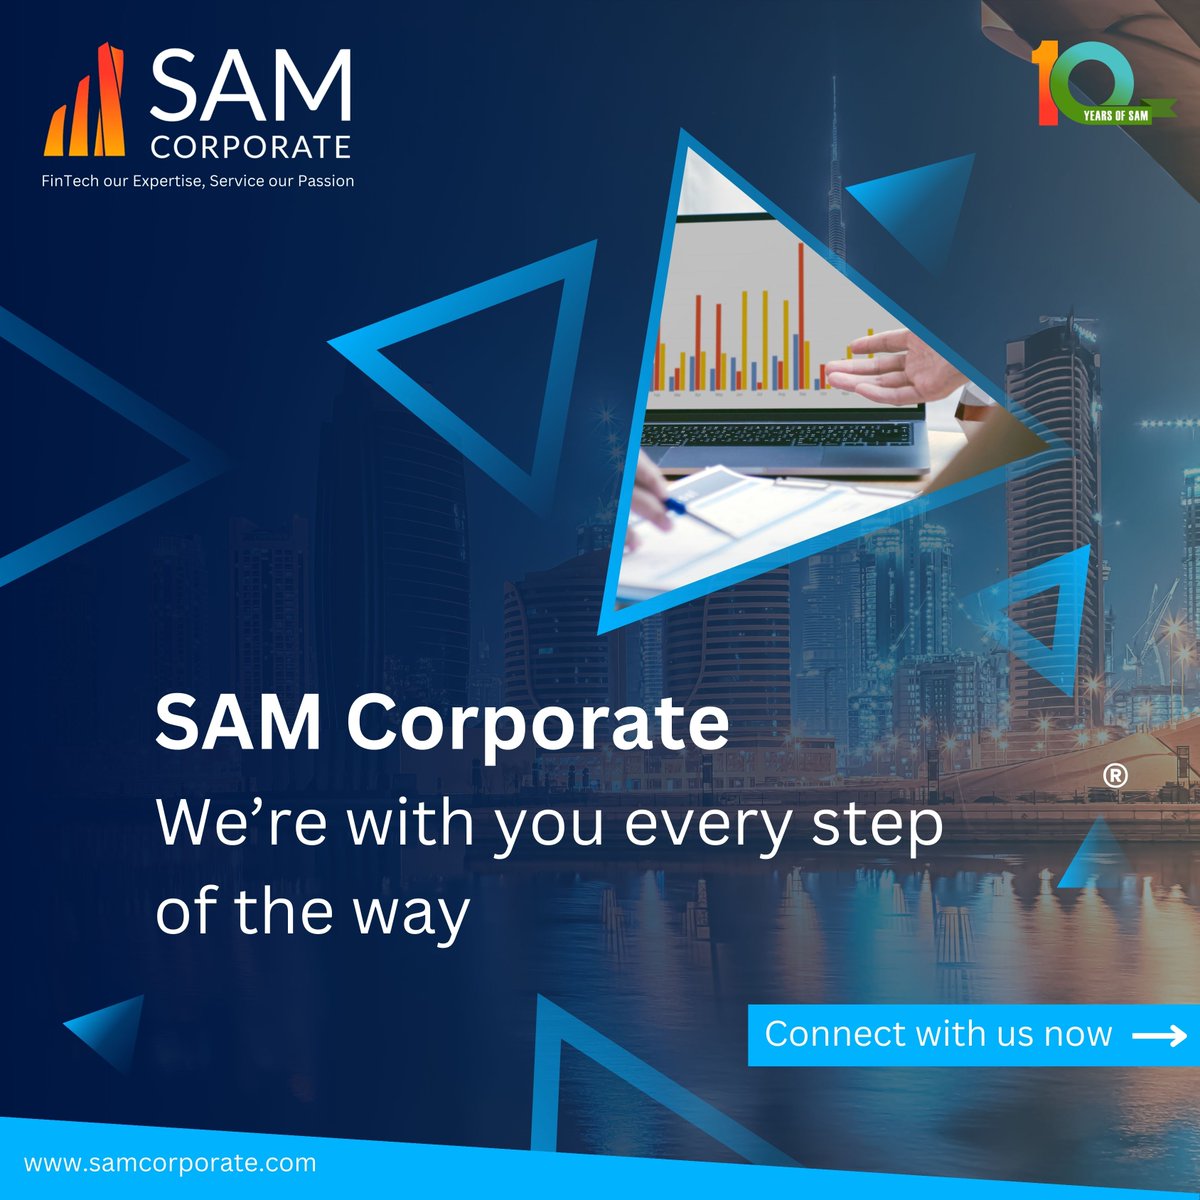 At SAM Corporate, your needs are our priority. We remain system-agnostic and can objectively recommend the solution that best fits your unique situation. 
Connect with us to know more: samcorporate.com/contact/
#FinTechsolutions #industryagnostic #SAMCorporate